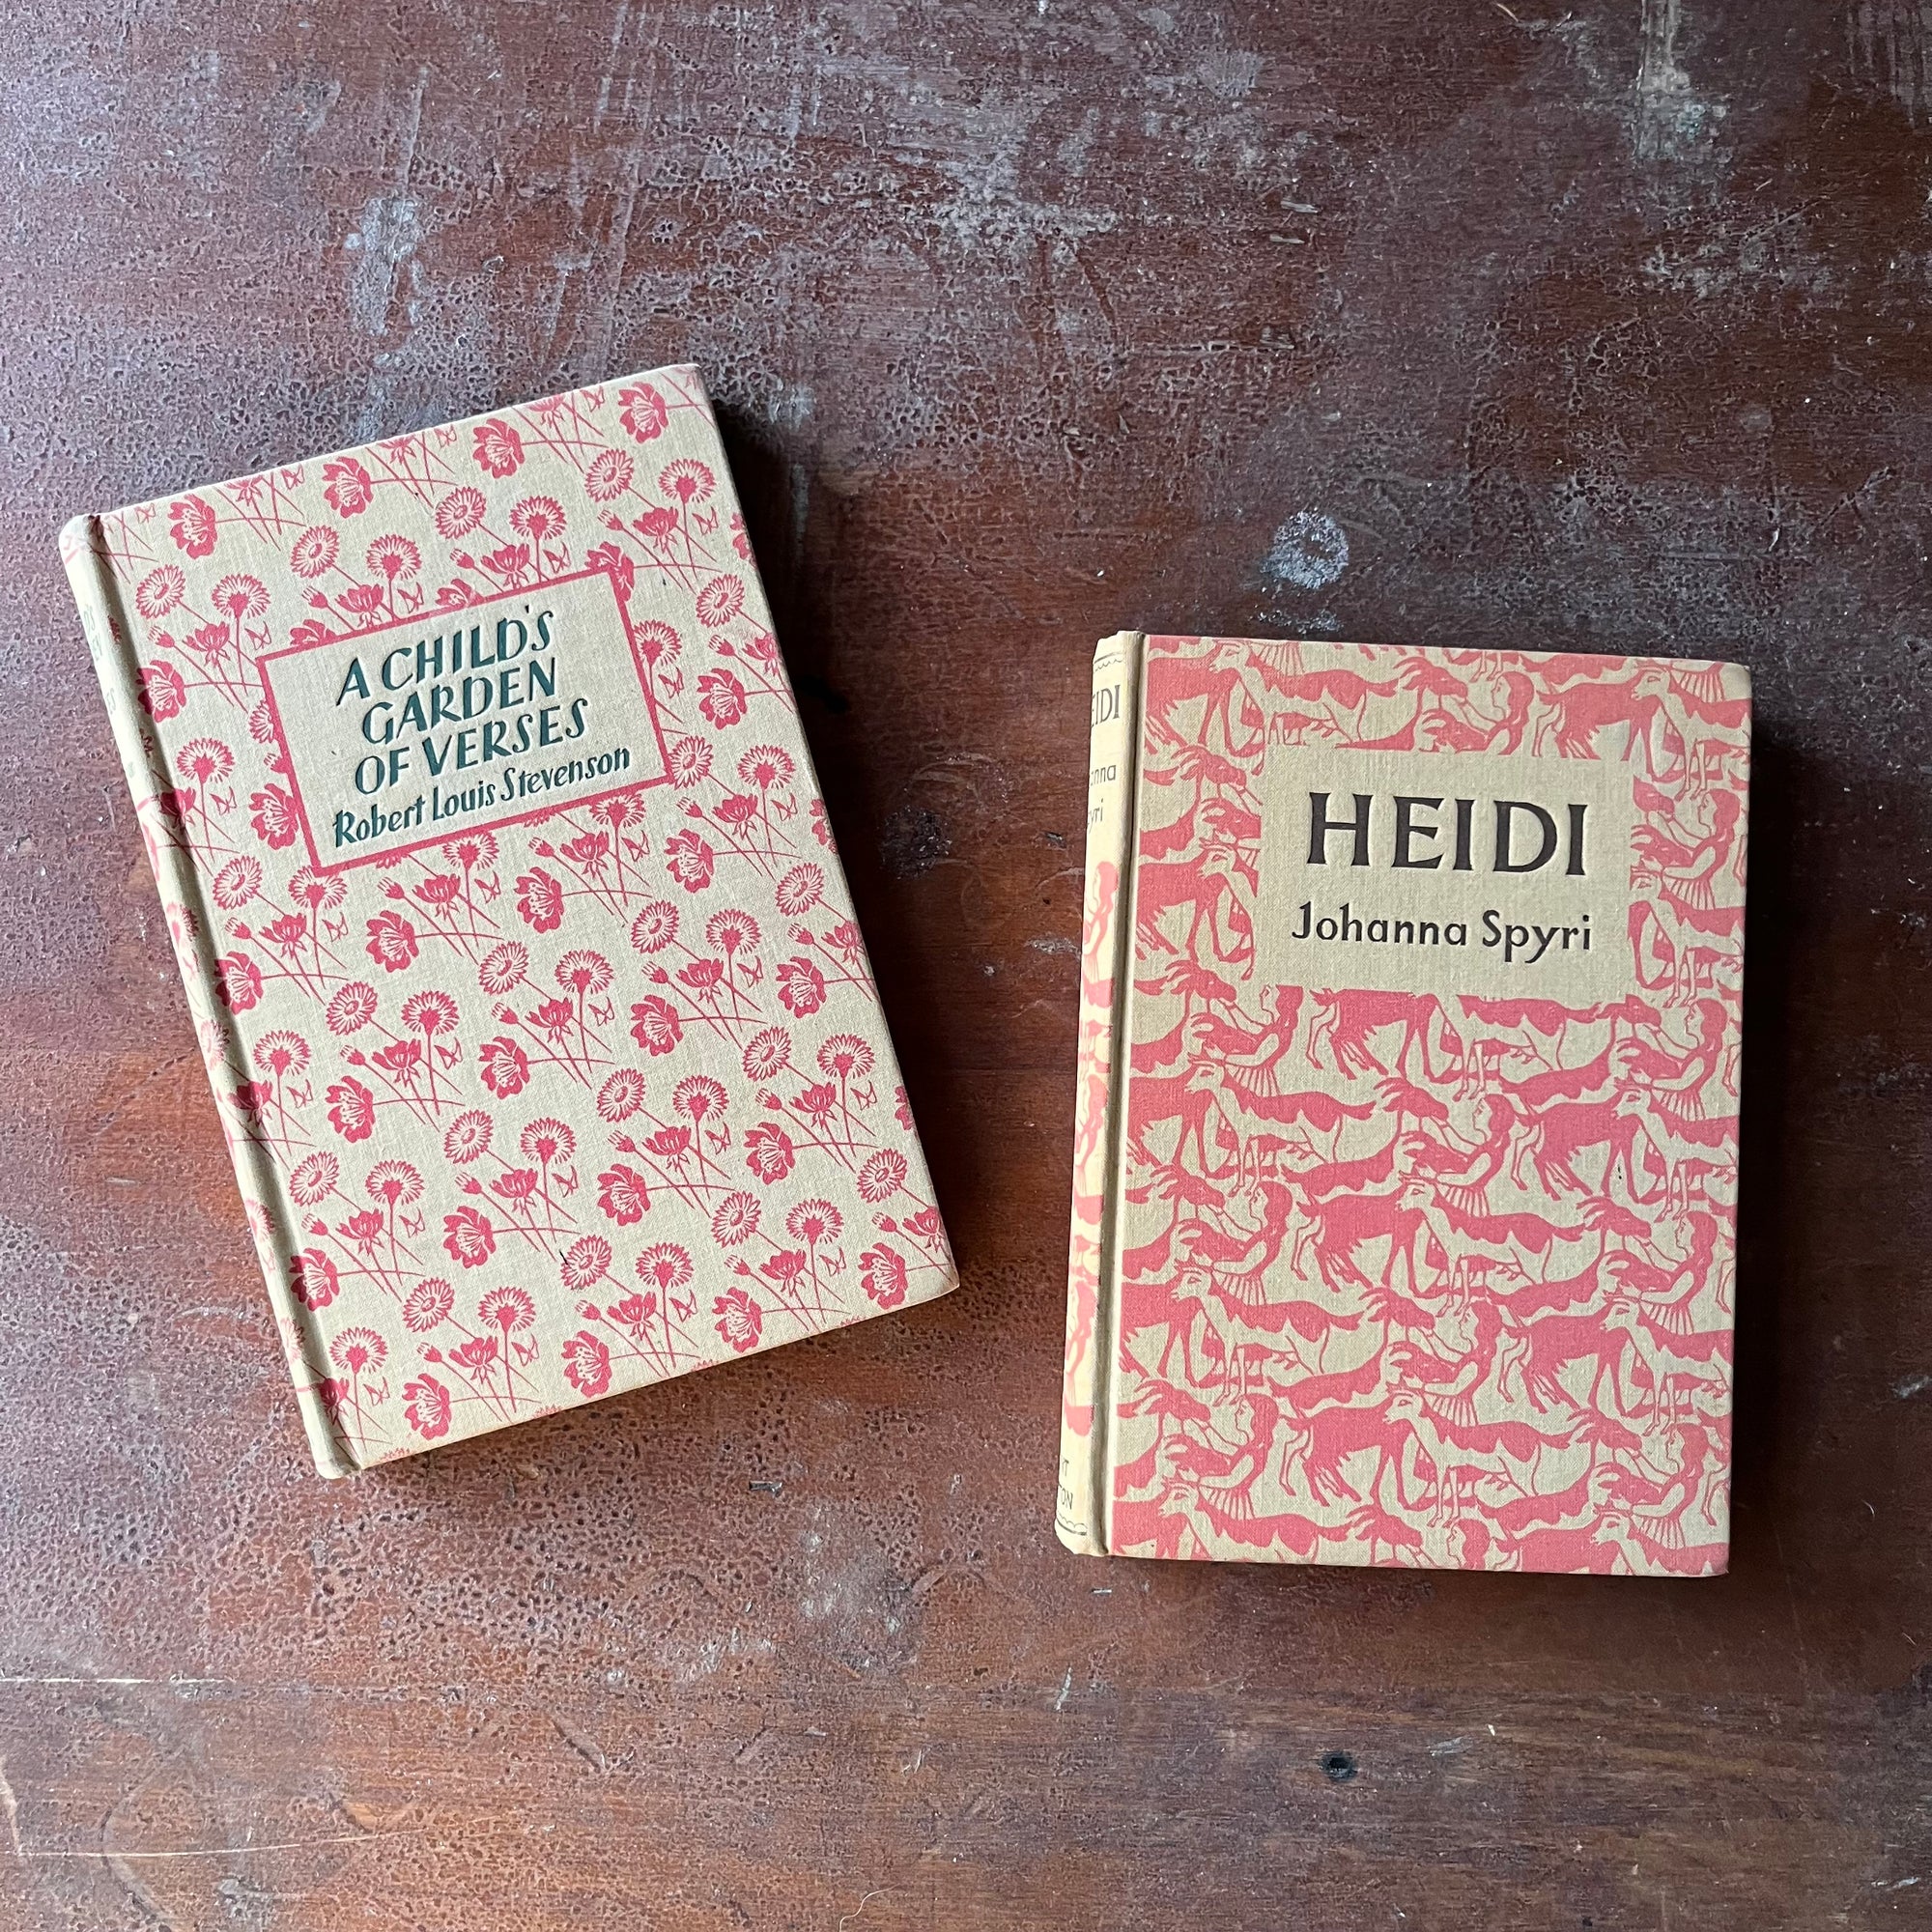 vintage children's books with decorative covers - Pair of Dent Dutton Books:  Heidi written by Johanna Spyri & A Child's Garden of Verses written by Robert Louis Stevenson - view of the embossed covers in shades of pink & cream